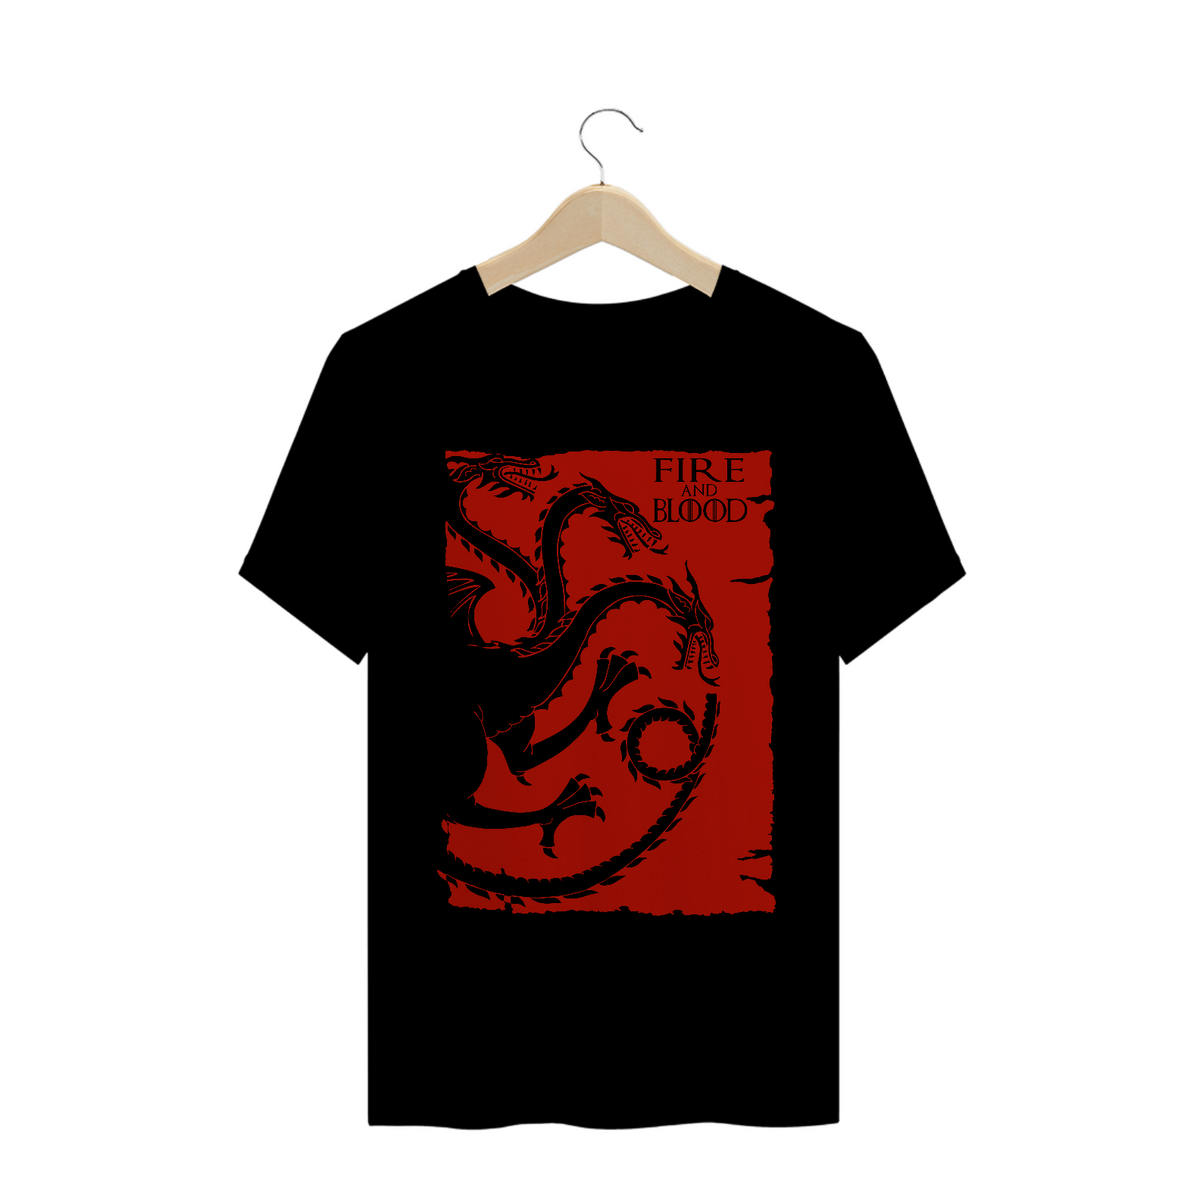 Nome do produto: Camiseta Game of Thrones Fire And Blood